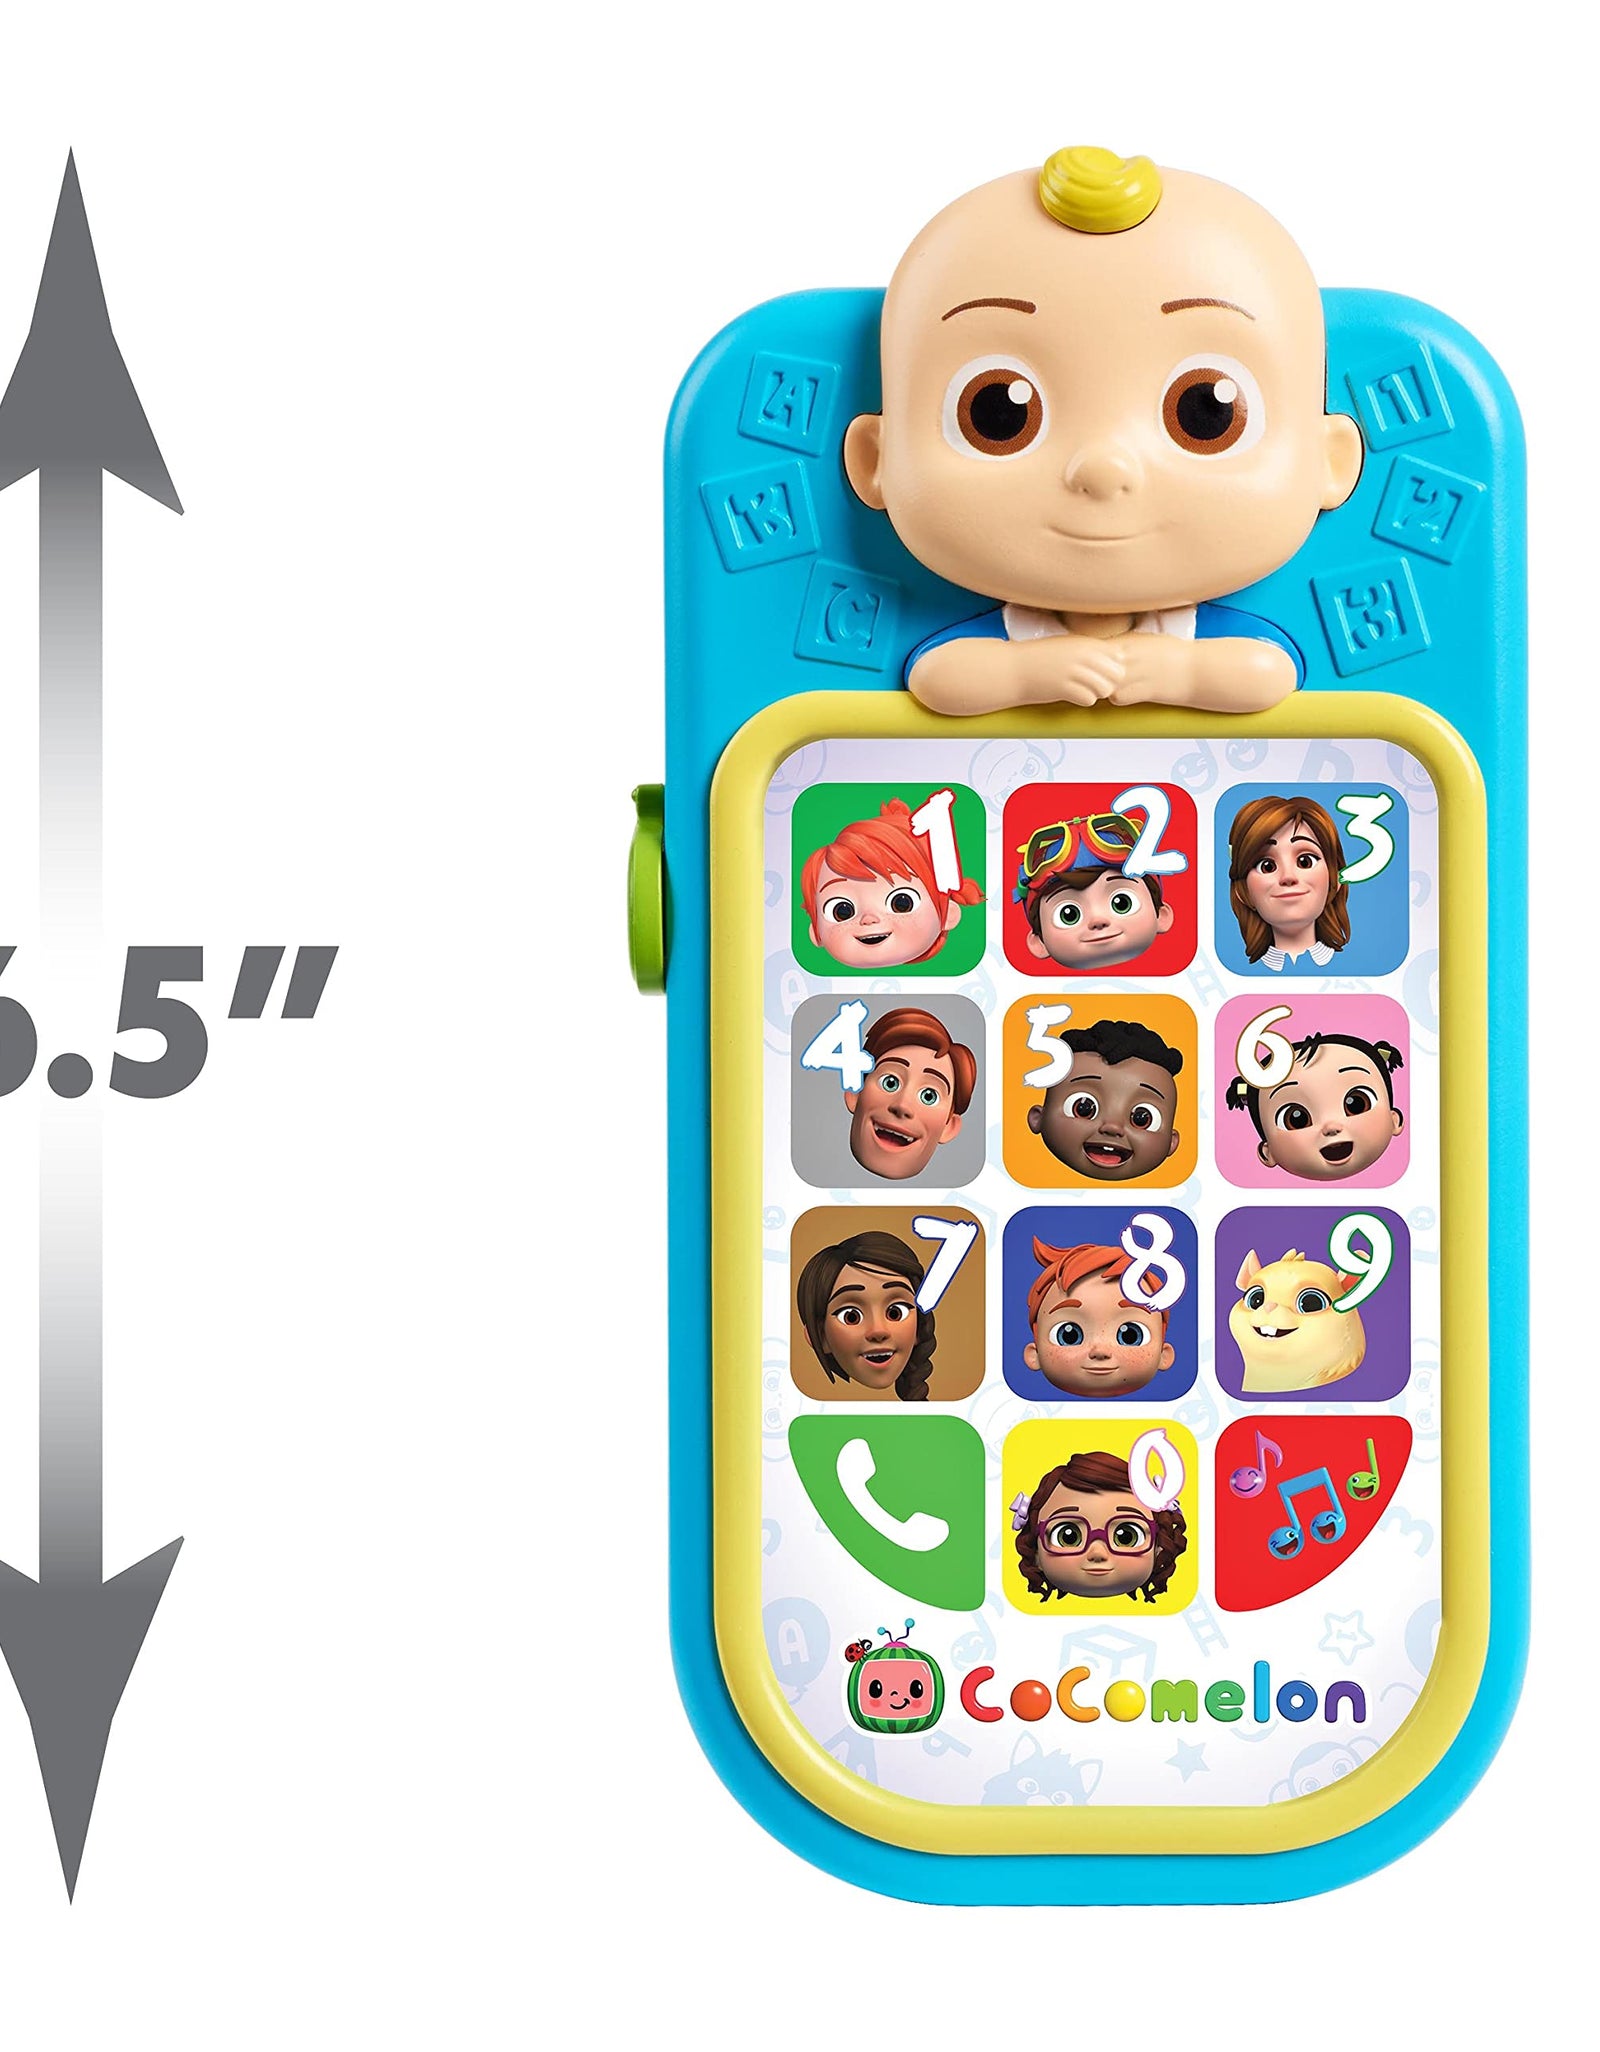 CoComelon JJ’s First Learning Toy Phone for Kids with Lights, Sounds, Music to Introduce Feelings, Letters, Numbers, Colors, Shapes, and Weather to Children, by Just Play